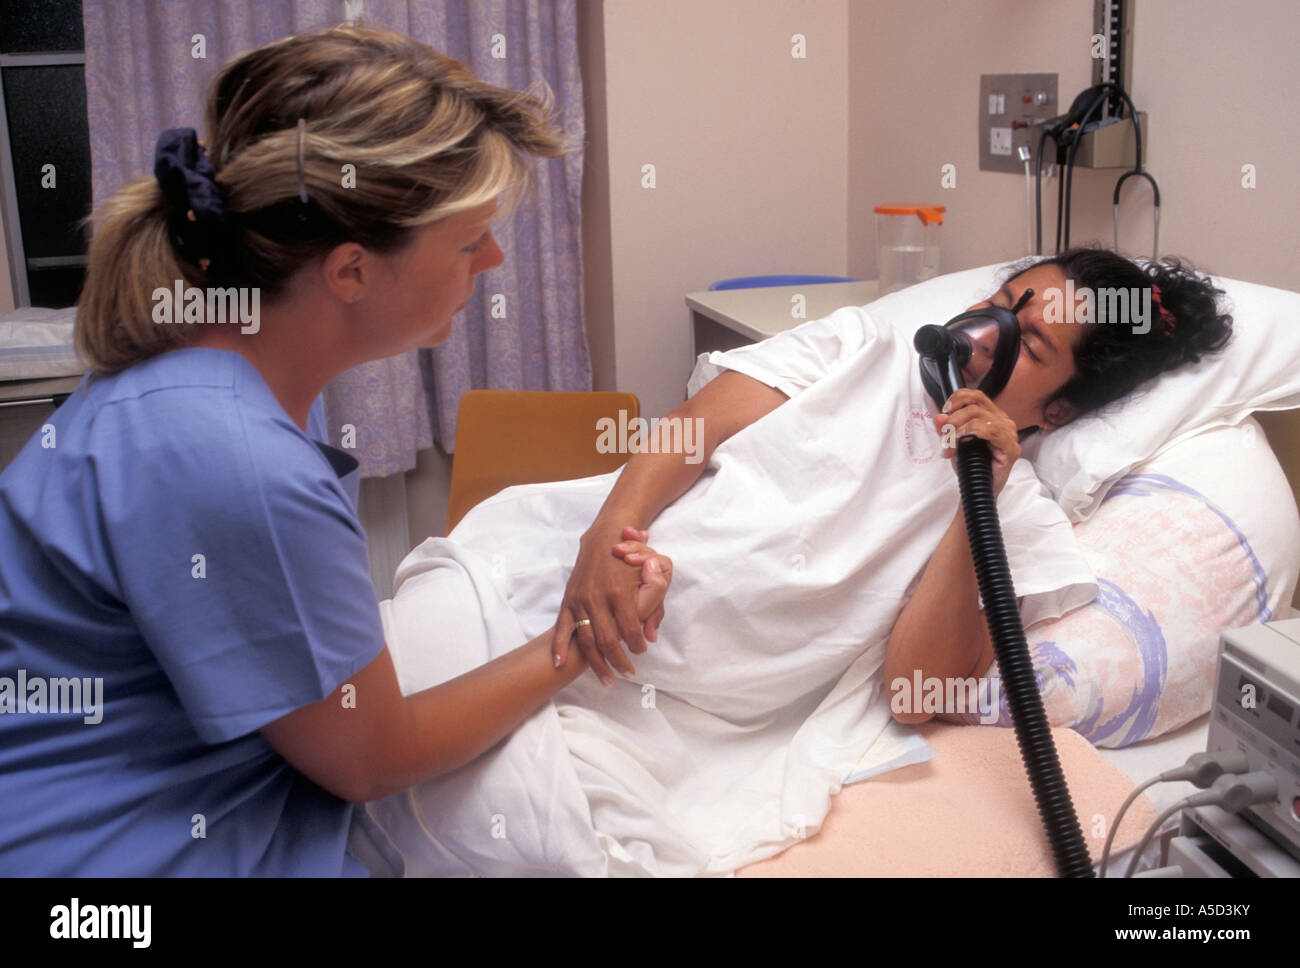 midwife supporting labouring hispanic woman in hospital with gas and air mask Stock Photo